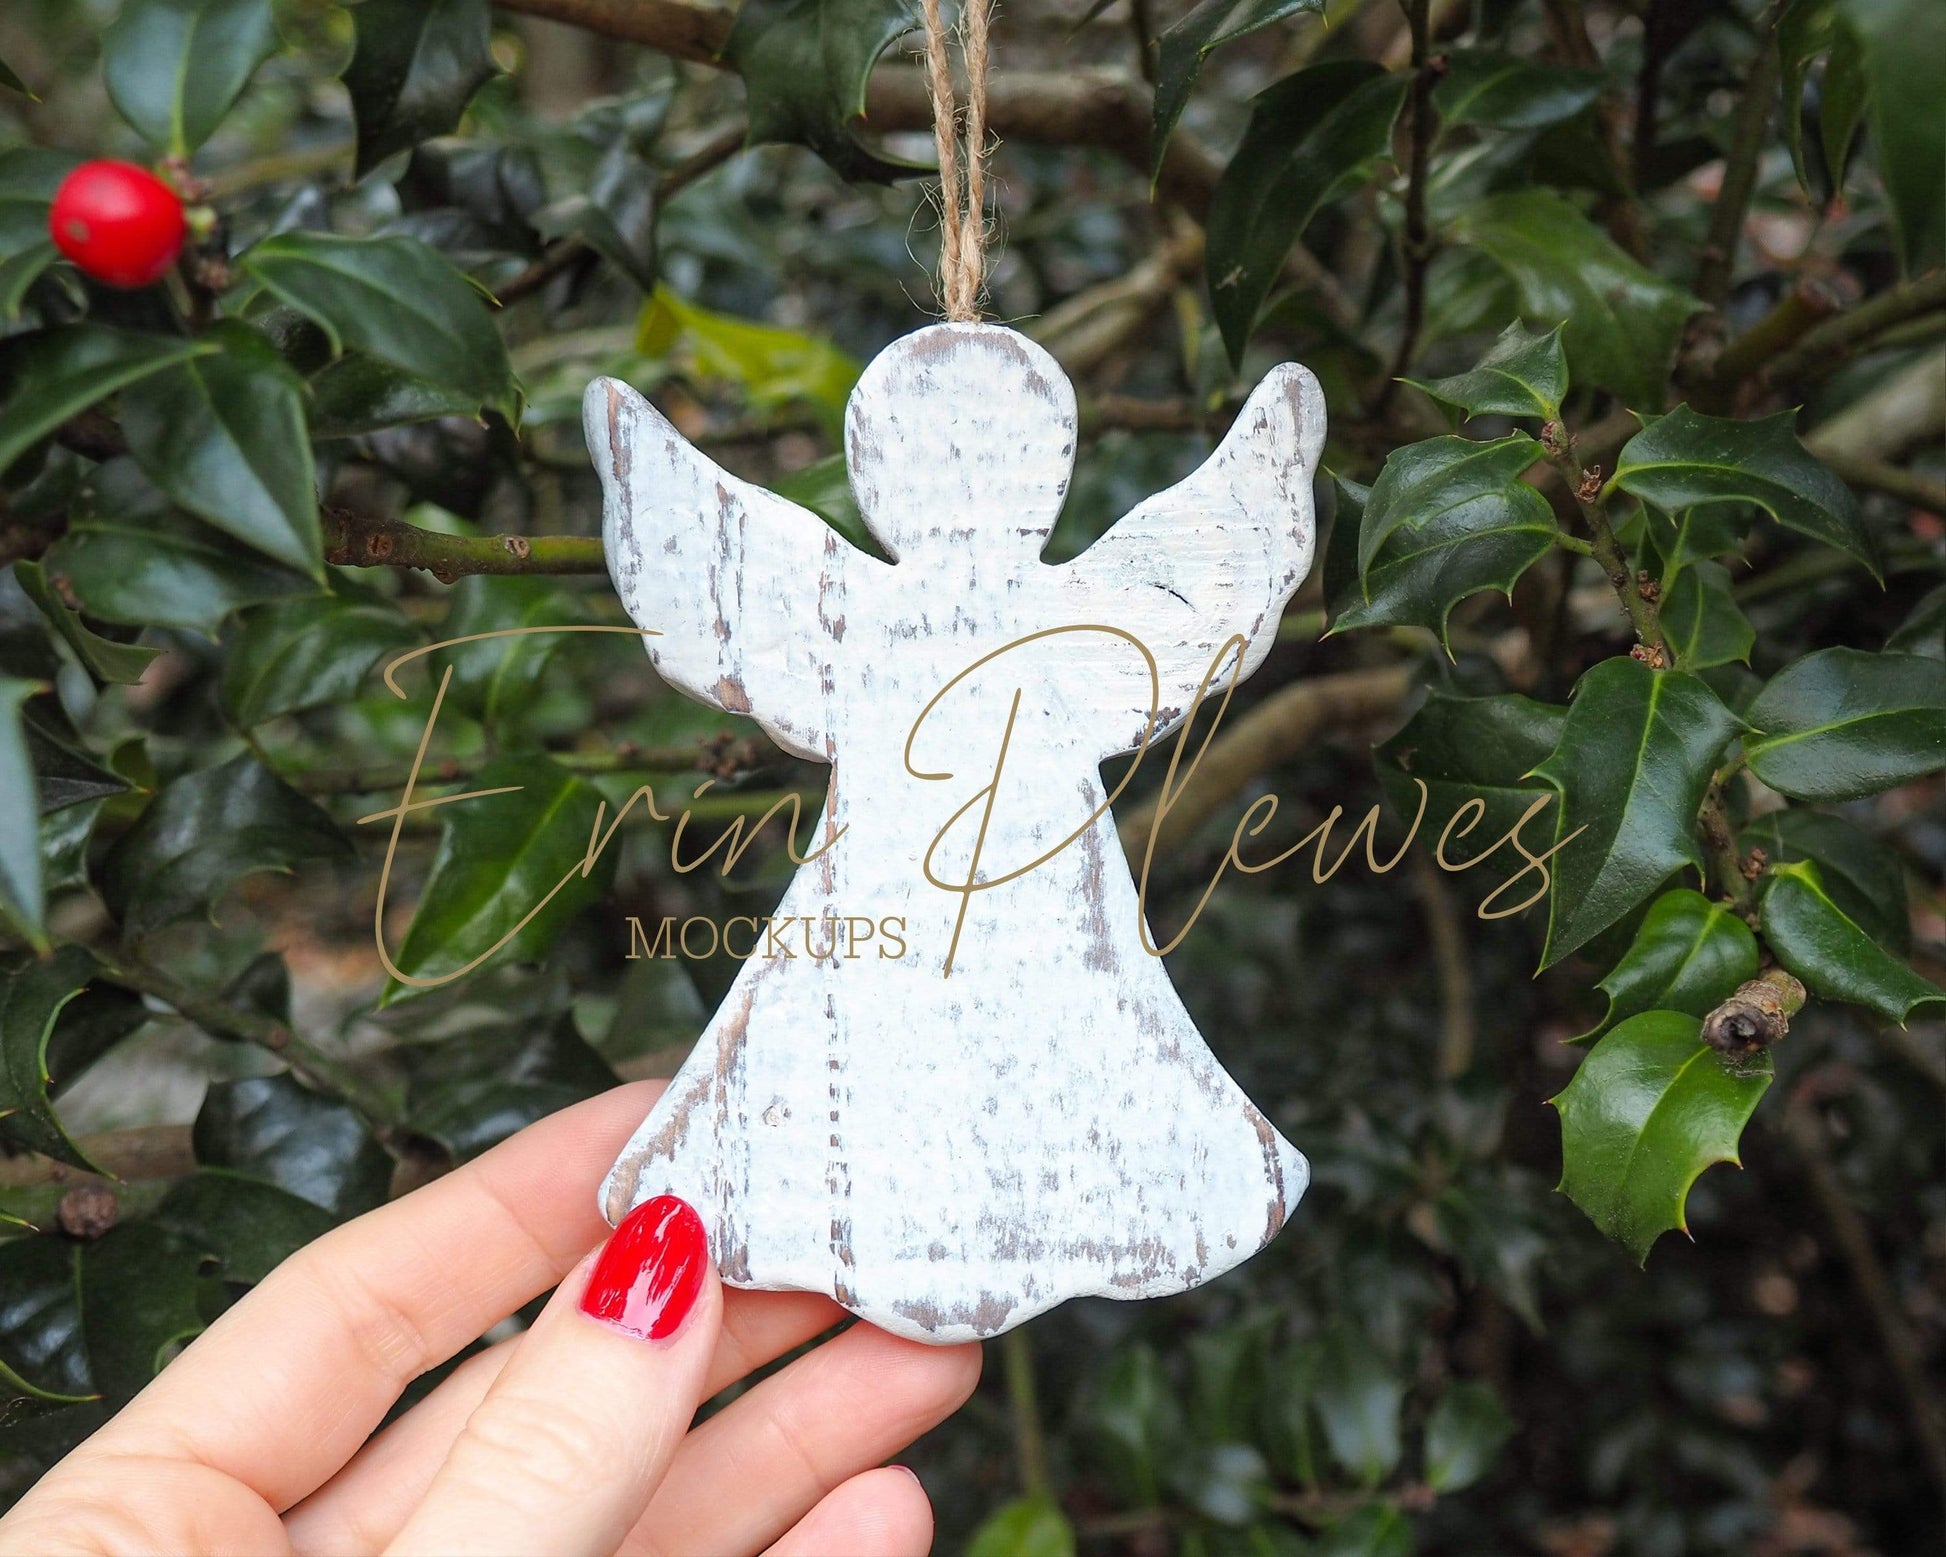 Erin Plewes Mockups Ornament mockup angel,  Christmas decor mock-up to add your image template for lifestyle and stock images, Jpeg instant Digital Download